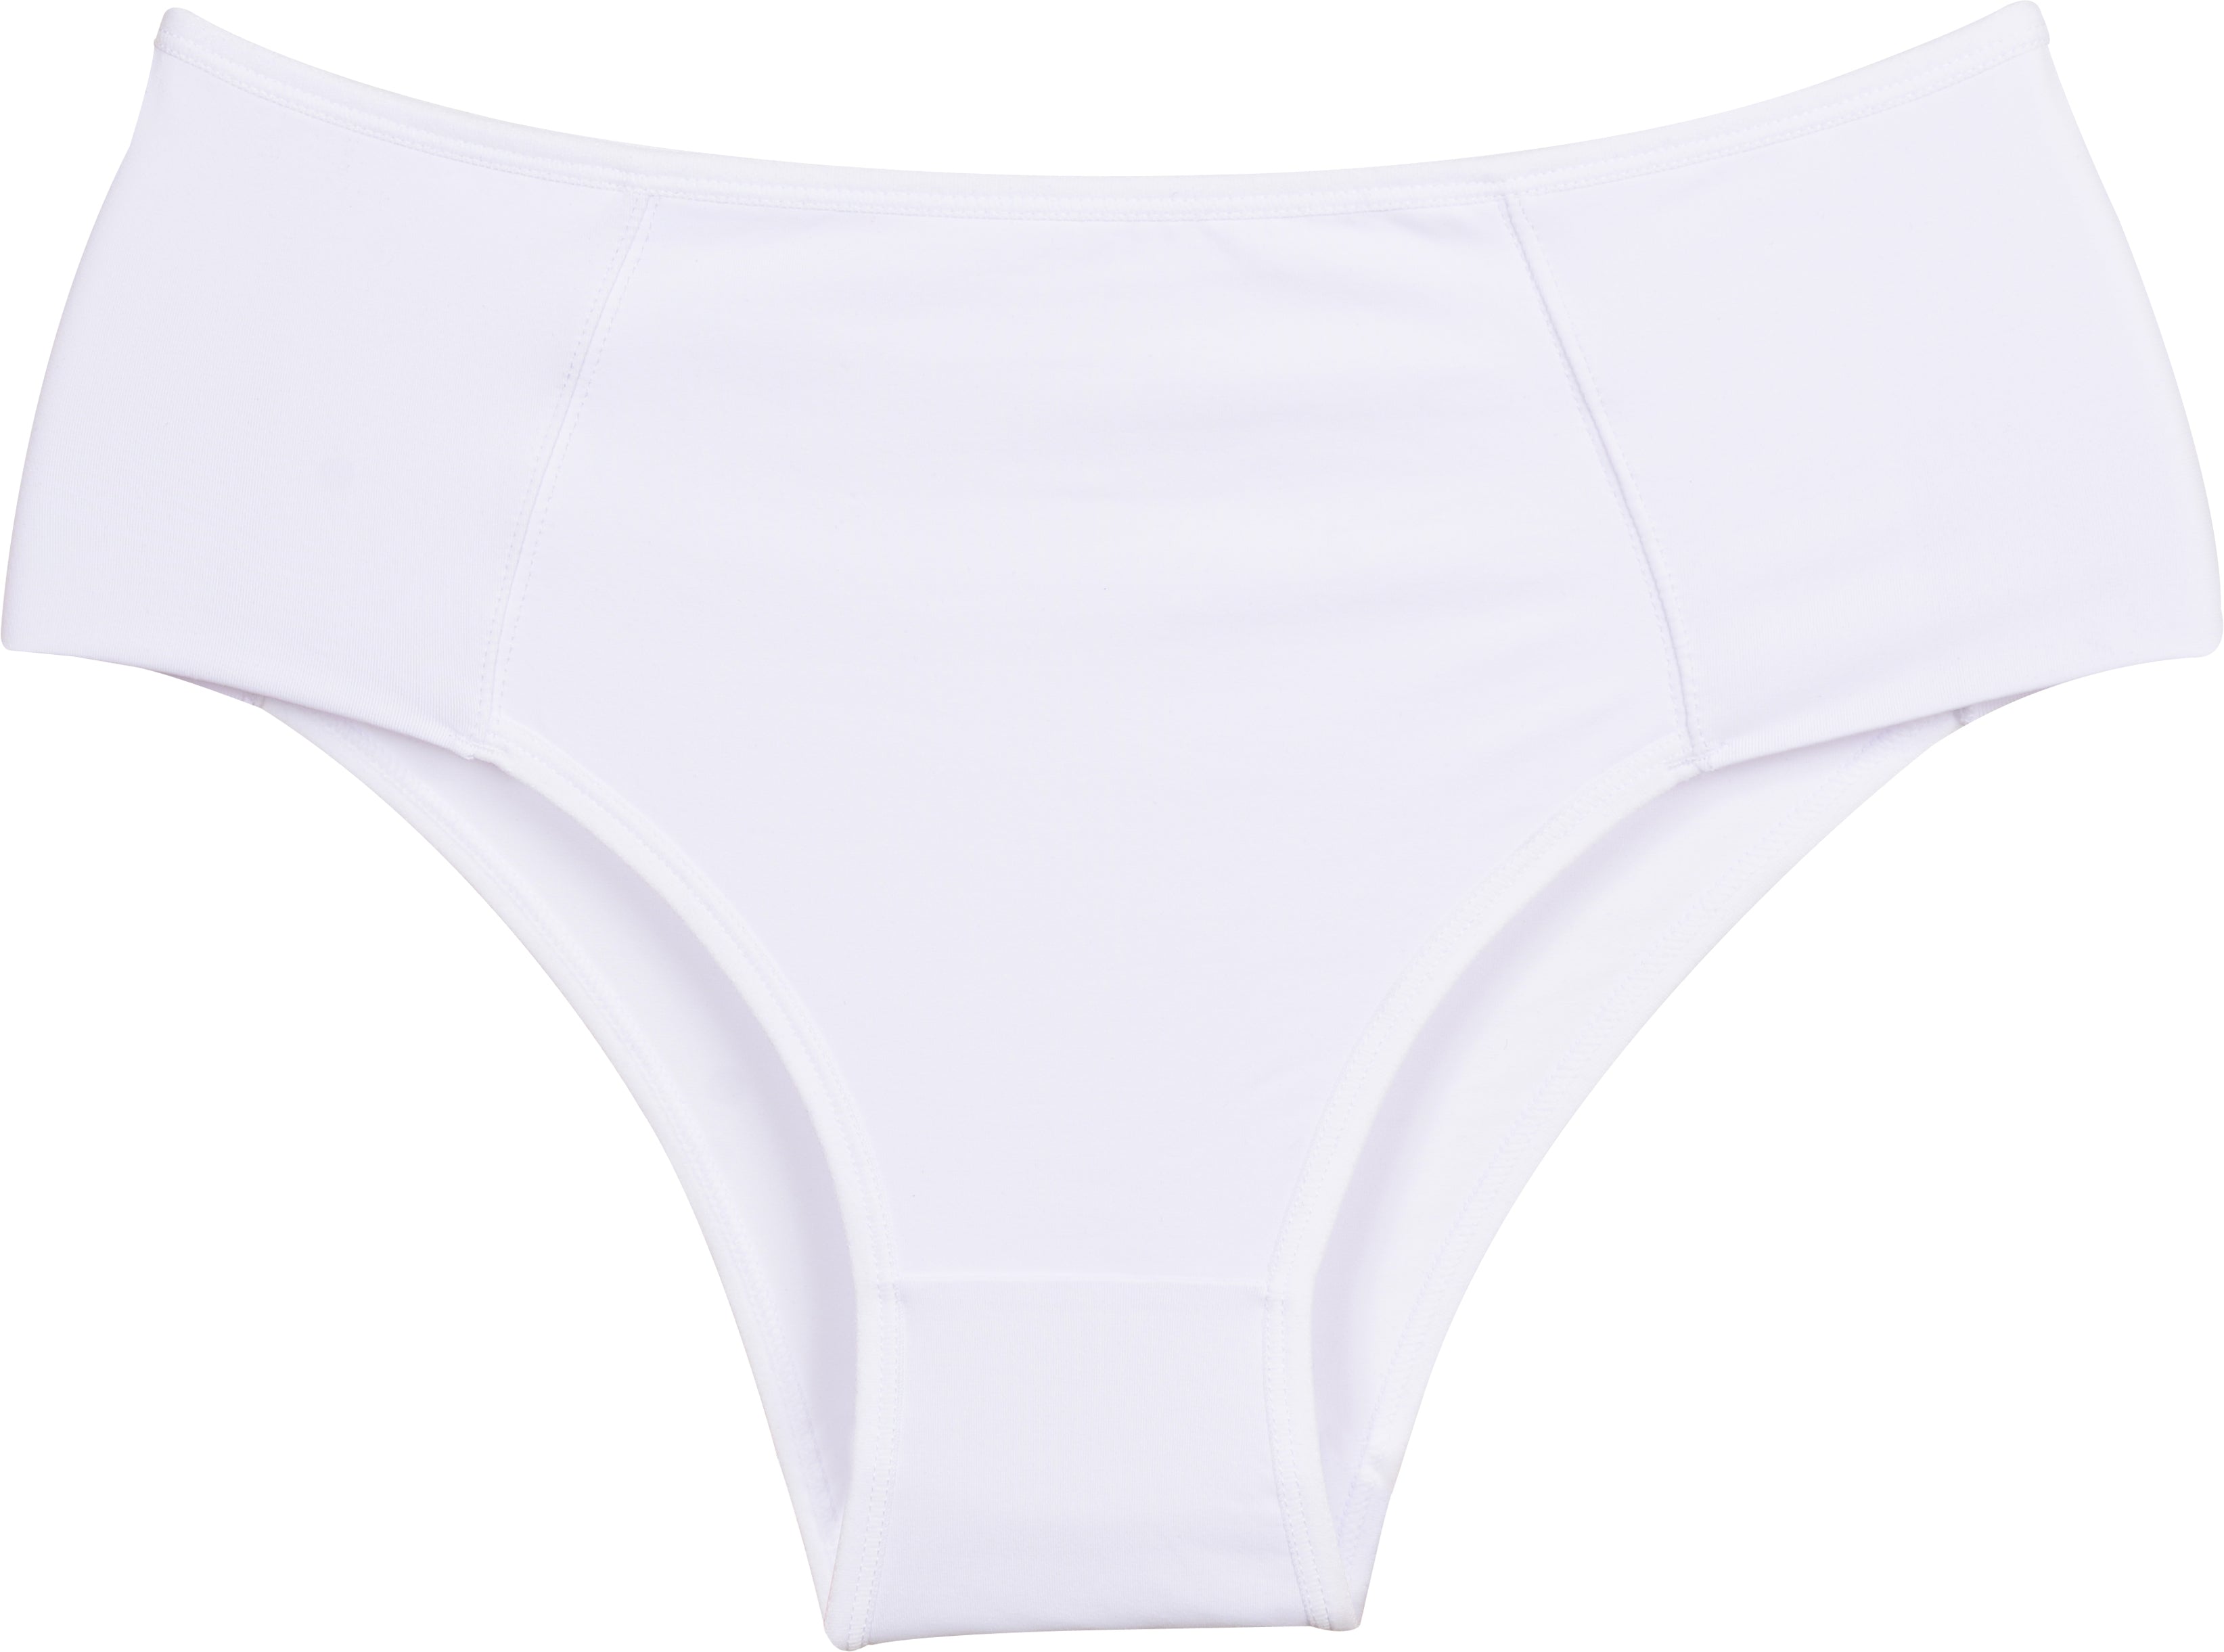 Reinforced Double front Microfiber Panty - 21919